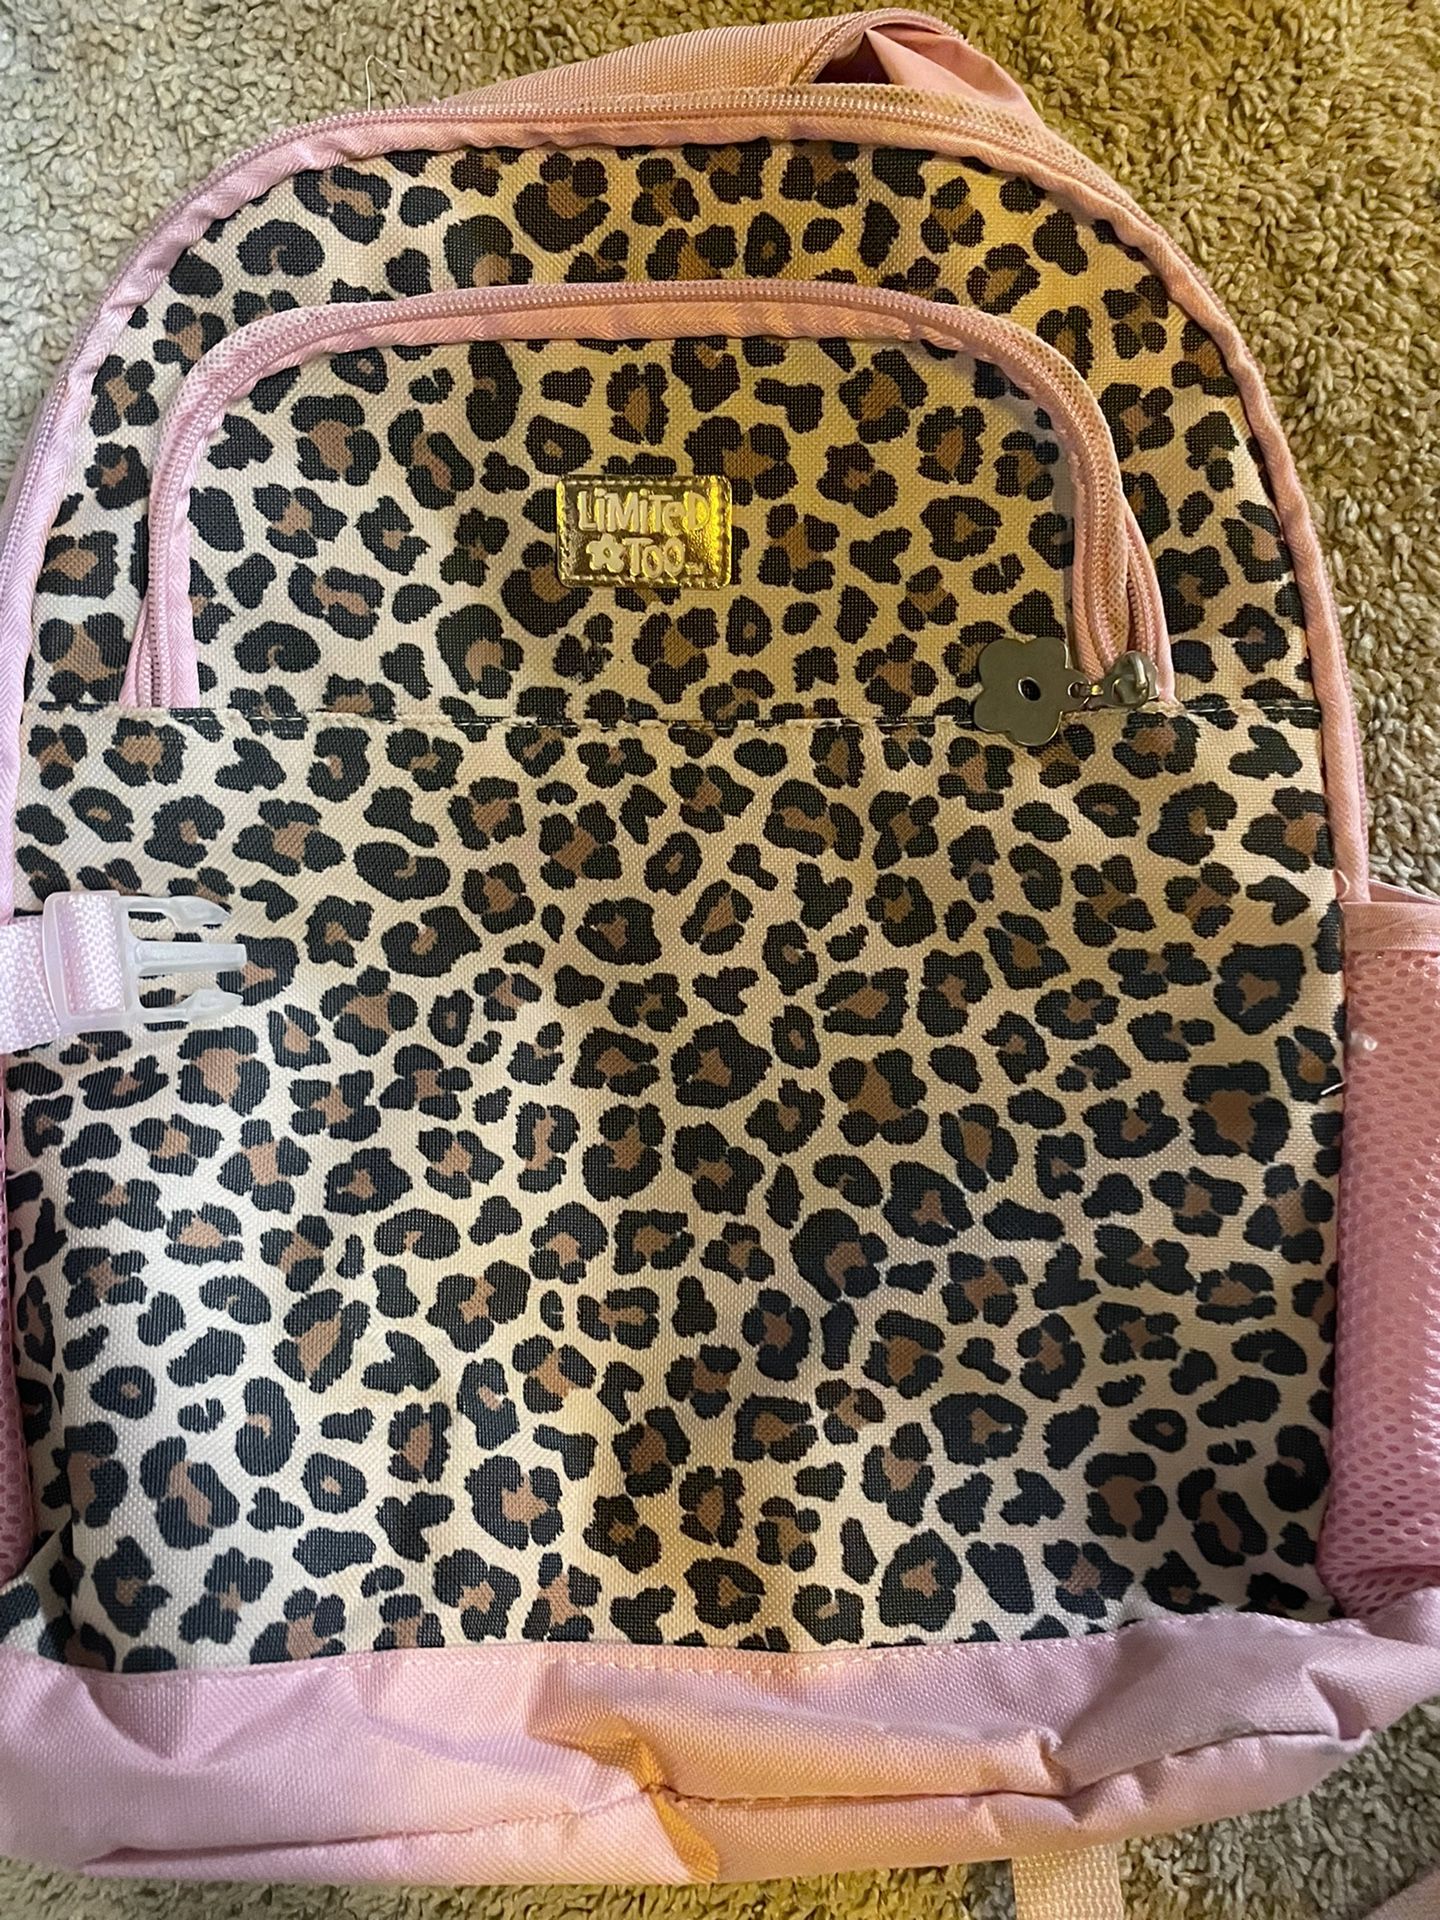 Girls Pink And Leopard Limited Too Backpack 